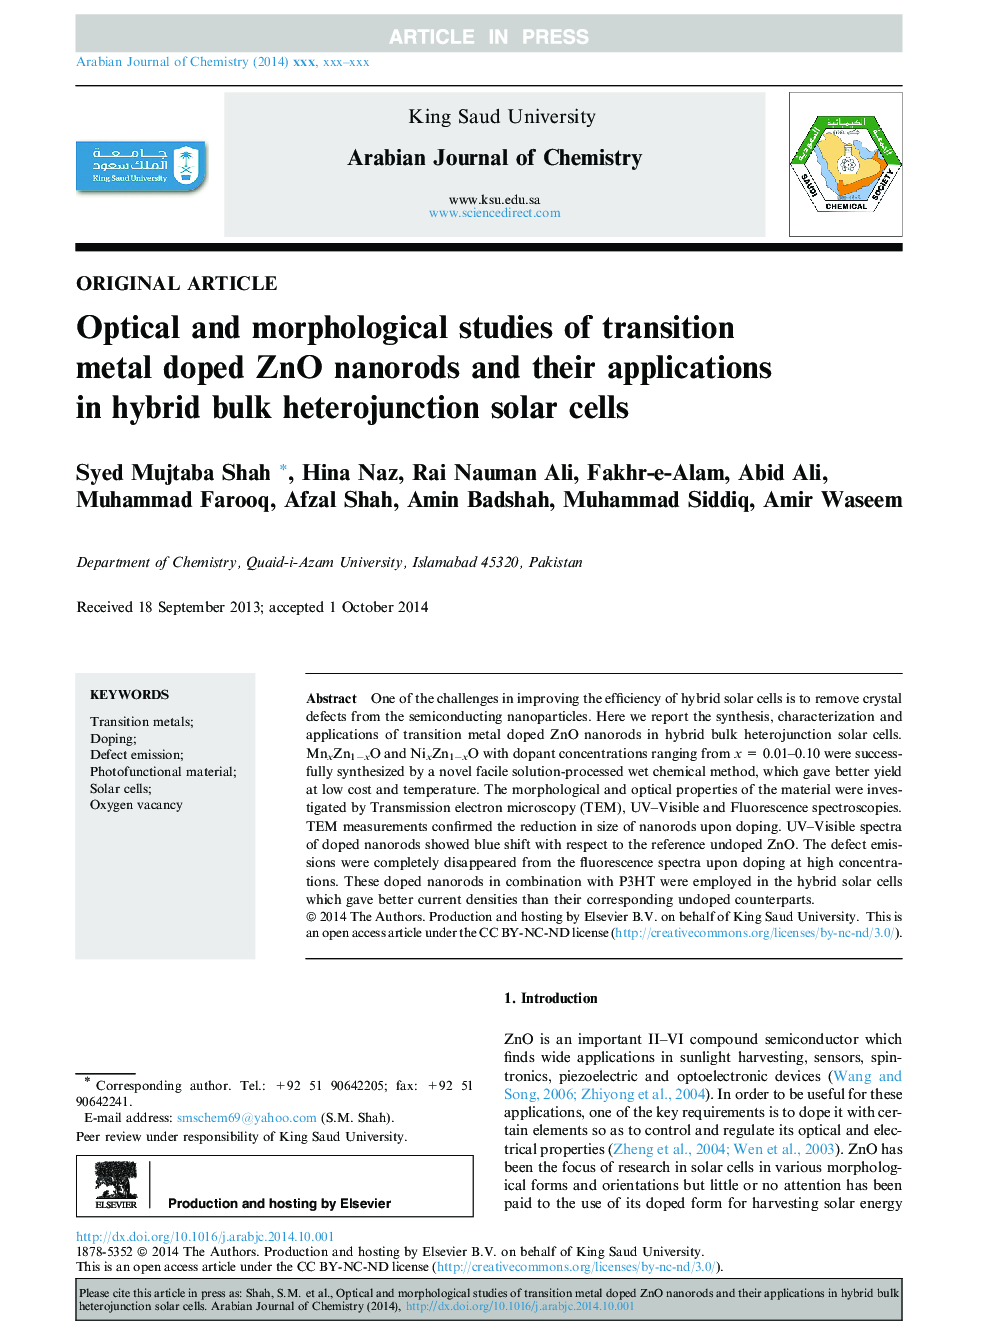 Optical and morphological studies of transition metal doped ZnO nanorods and their applications in hybrid bulk heterojunction solar cells